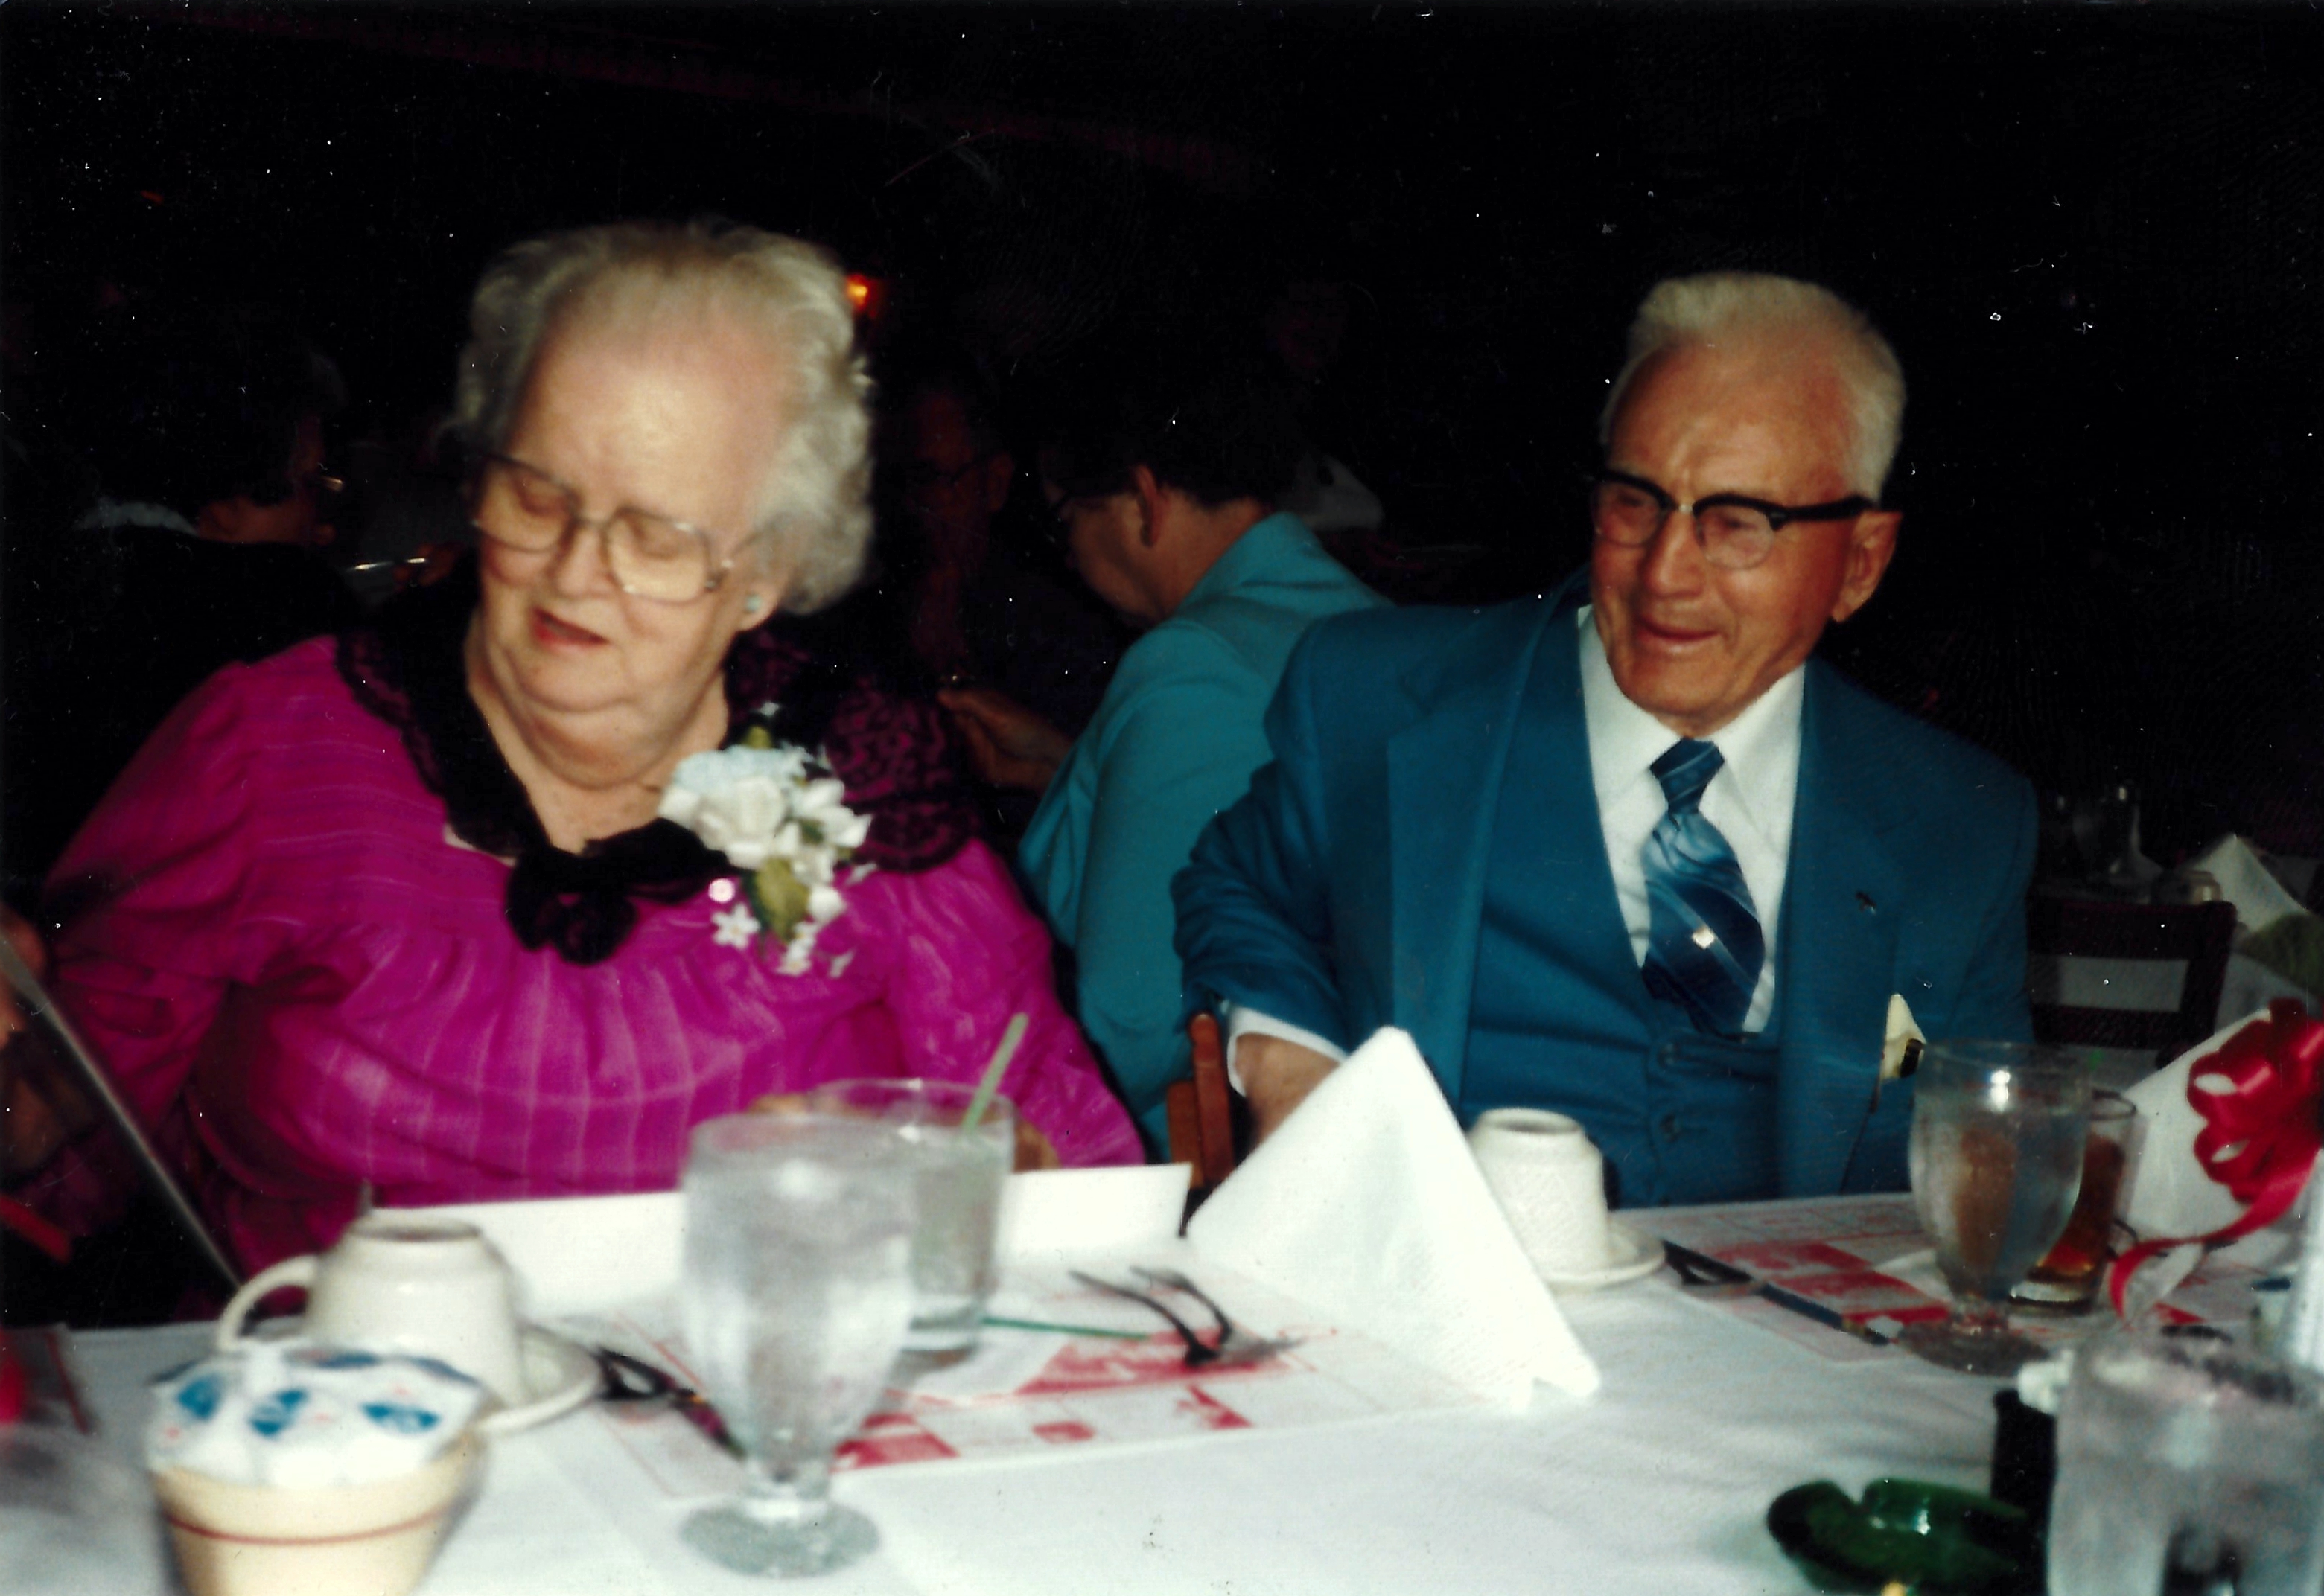 Pa and Ma Hillestad at a formal dinner